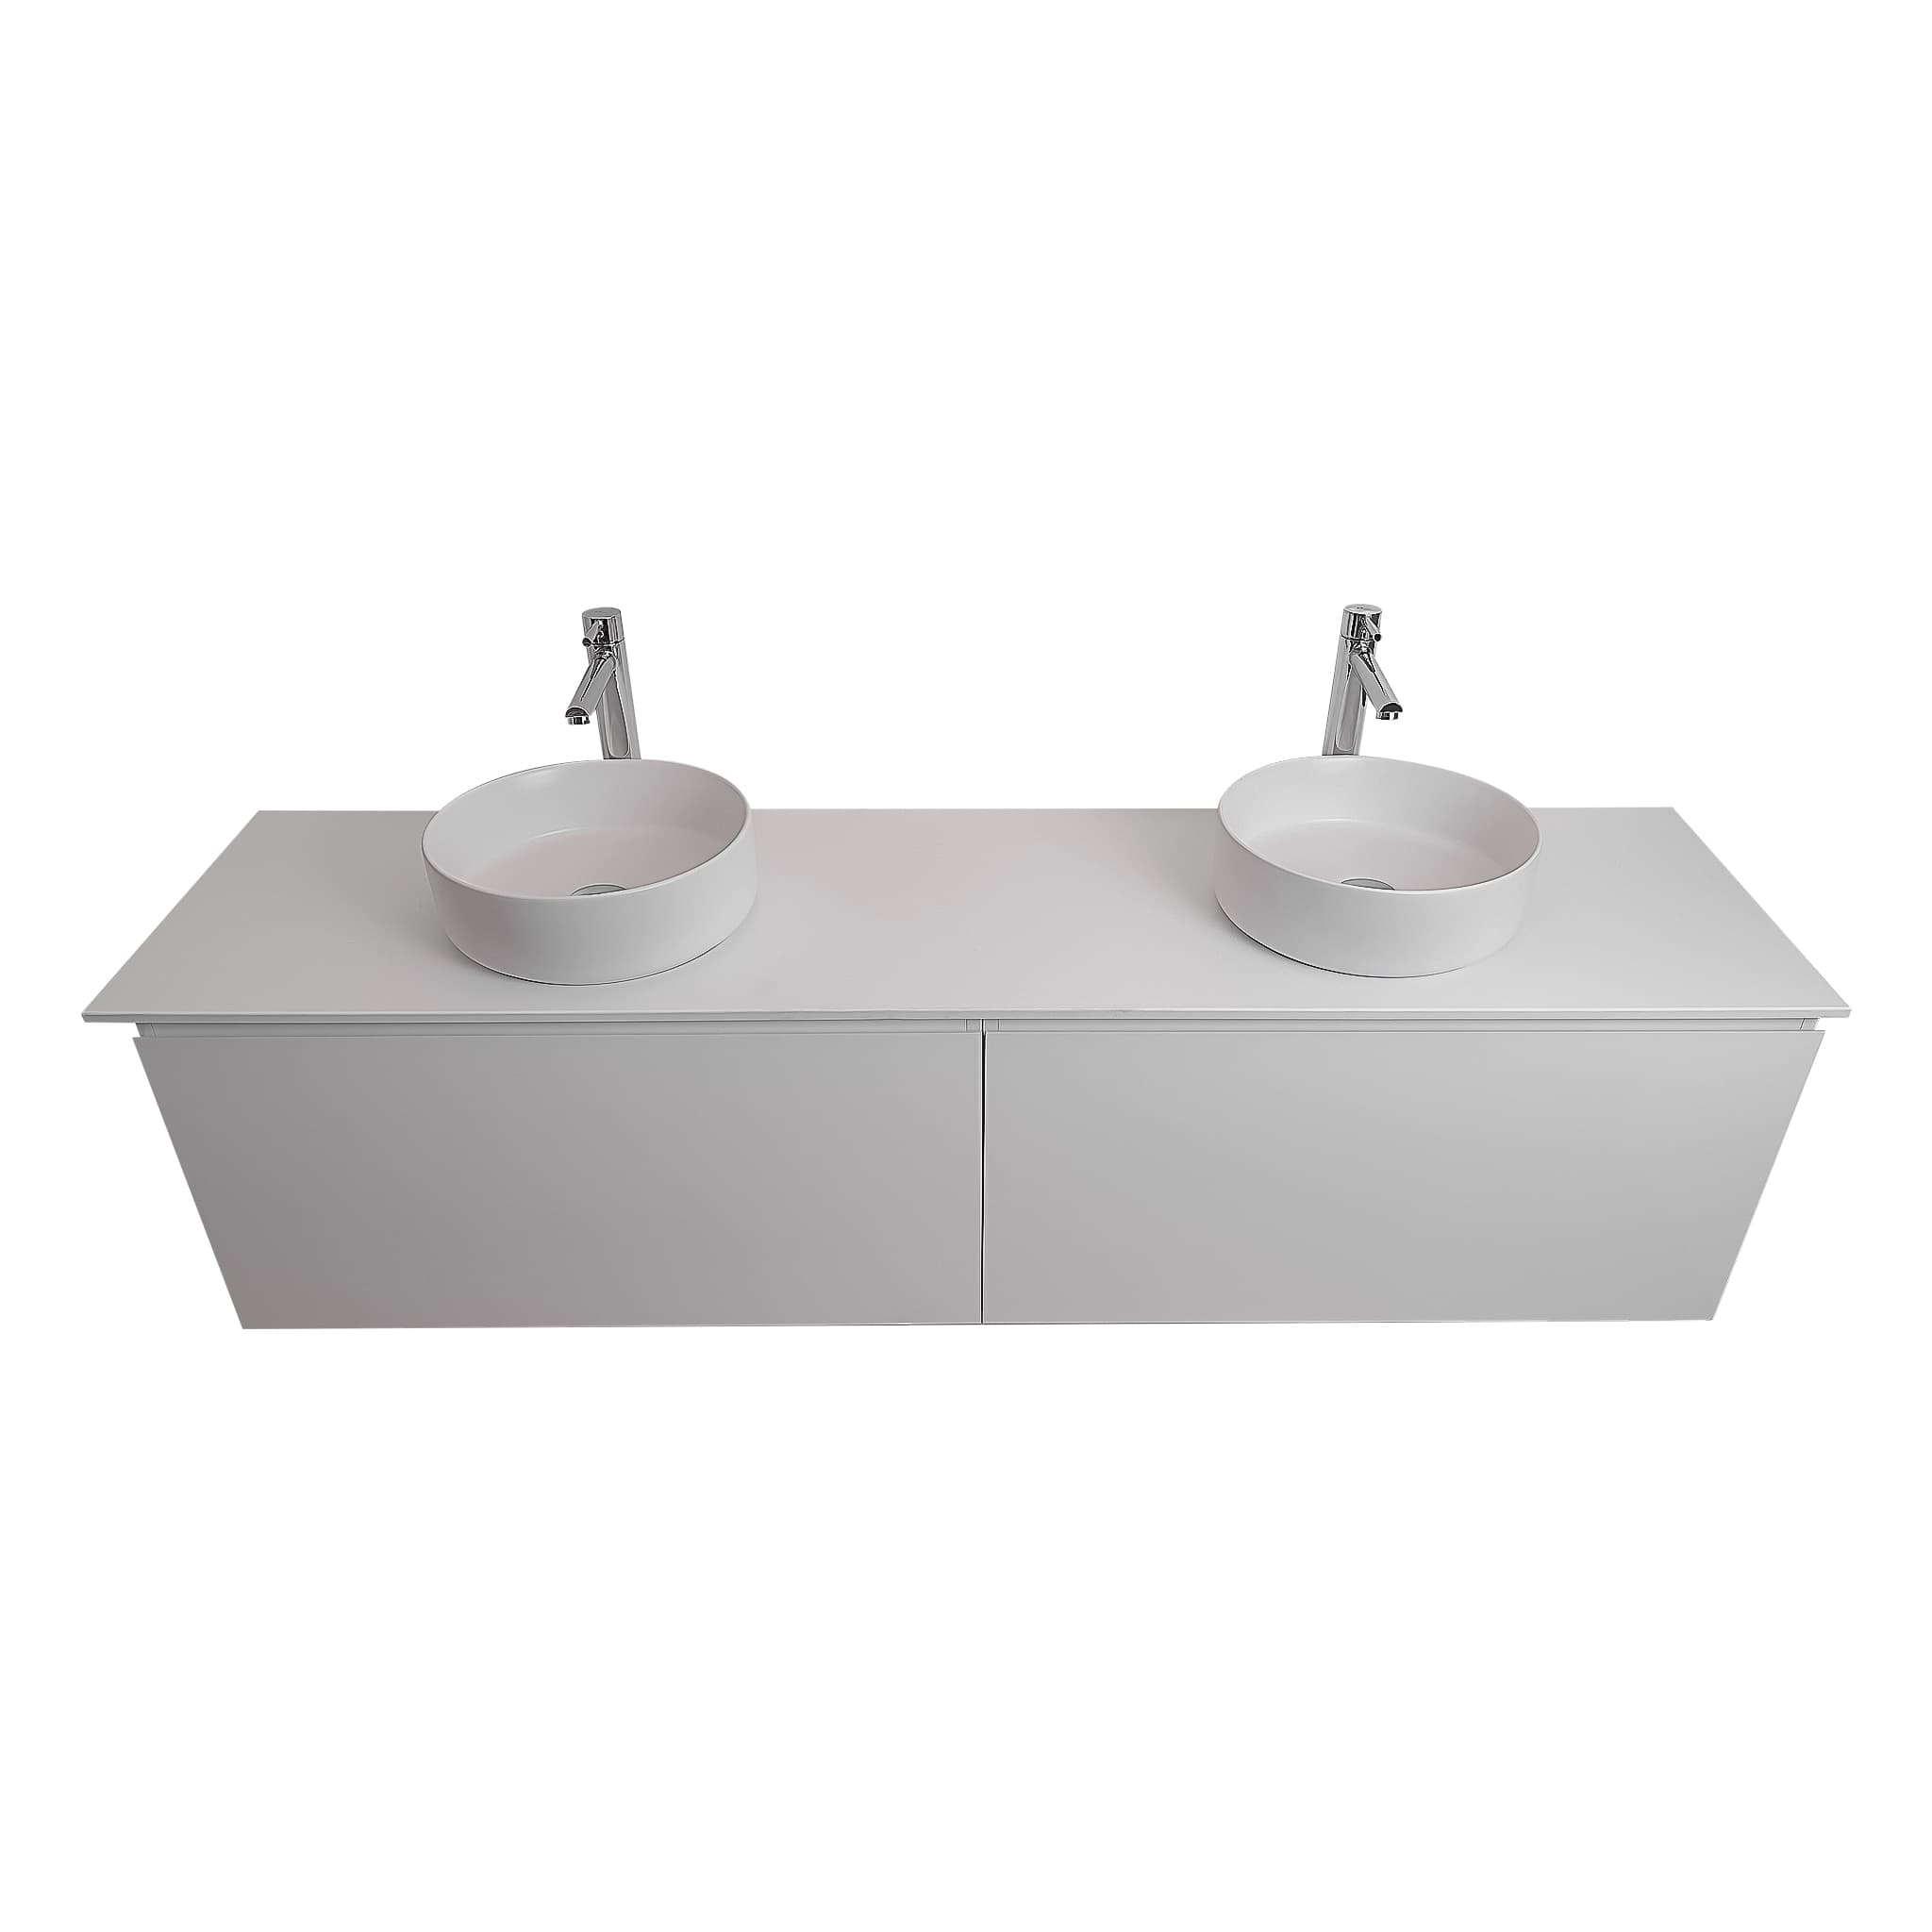 Venice 63 White High Gloss Cabinet, Ares White Top And Two Ares White Ceramic Basin, Wall Mounted Modern Vanity Set